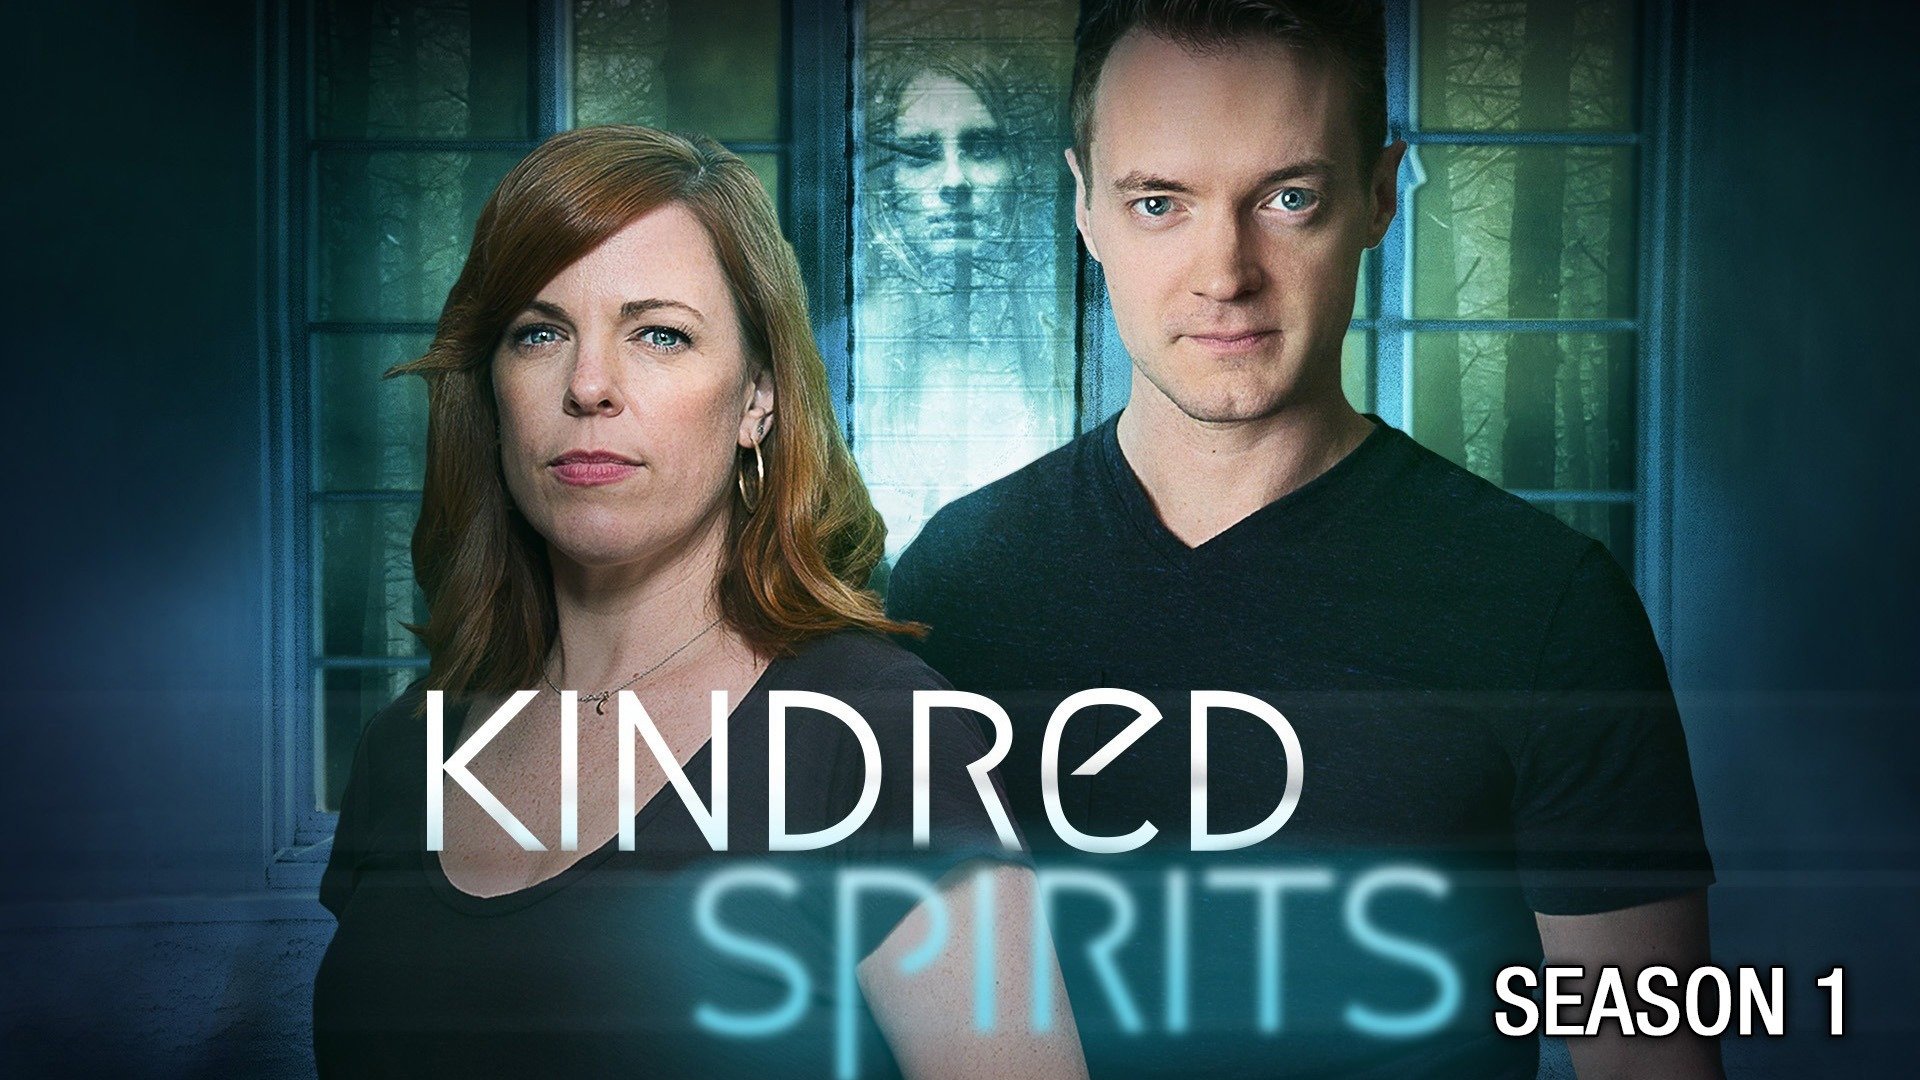 Kindred Spirits 2022 Schedule Kindred Spirits - Rotten Tomatoes